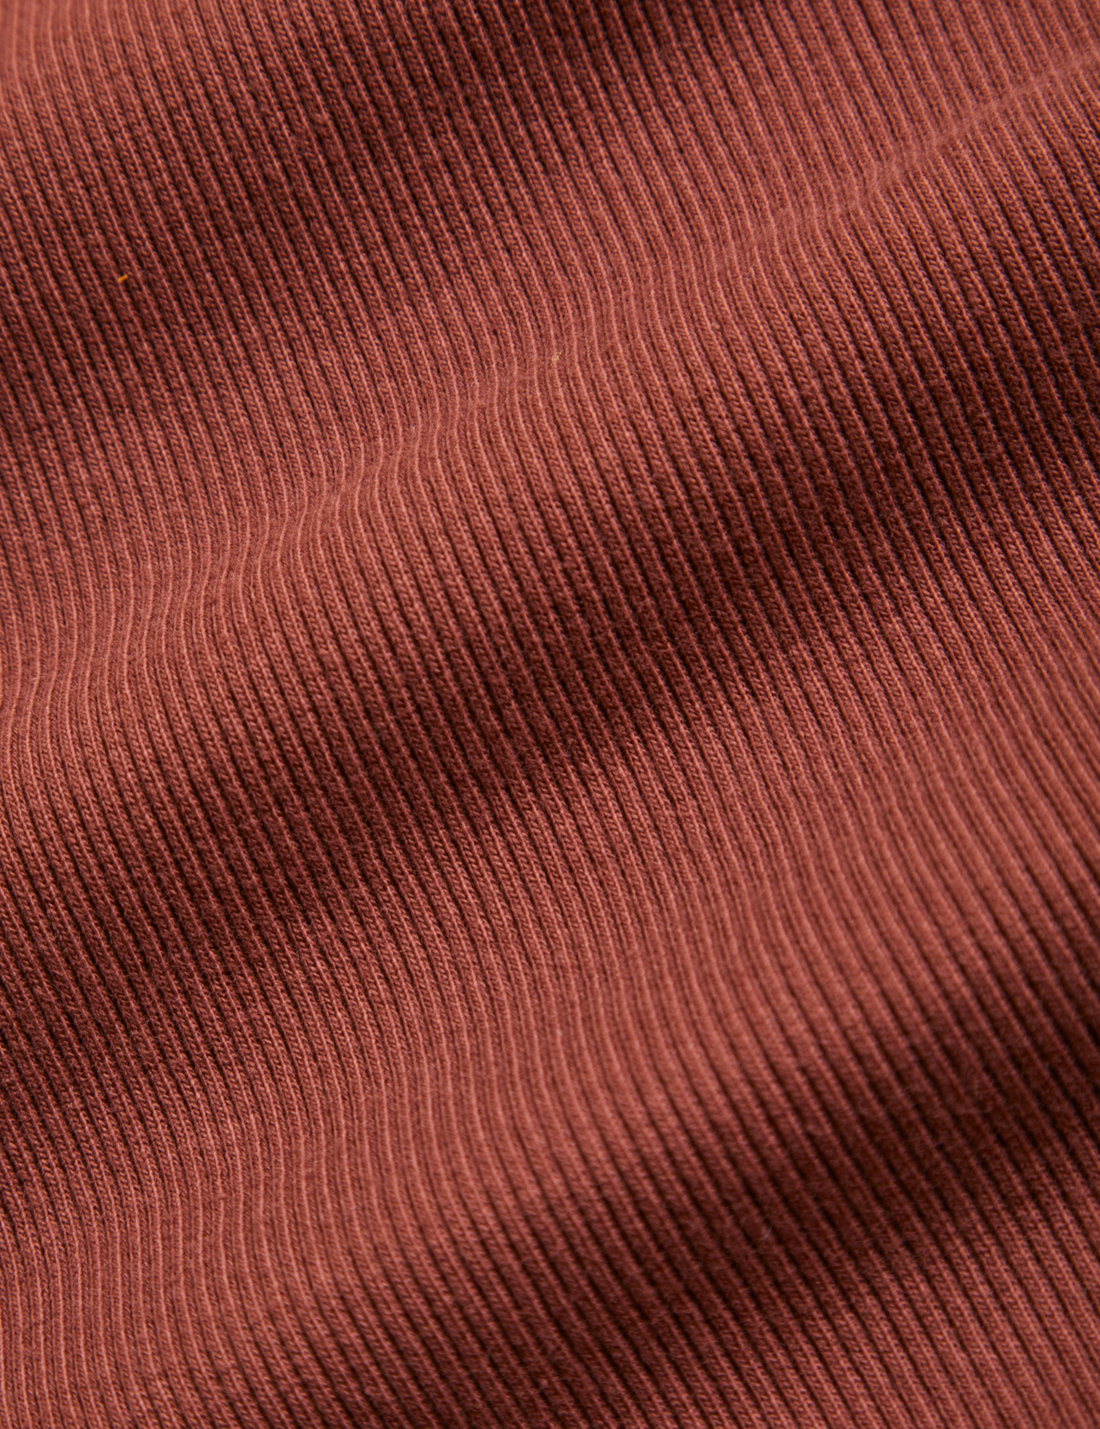 Essential Turtleneck in Fudgesicle Brown detail close up of knit fabric